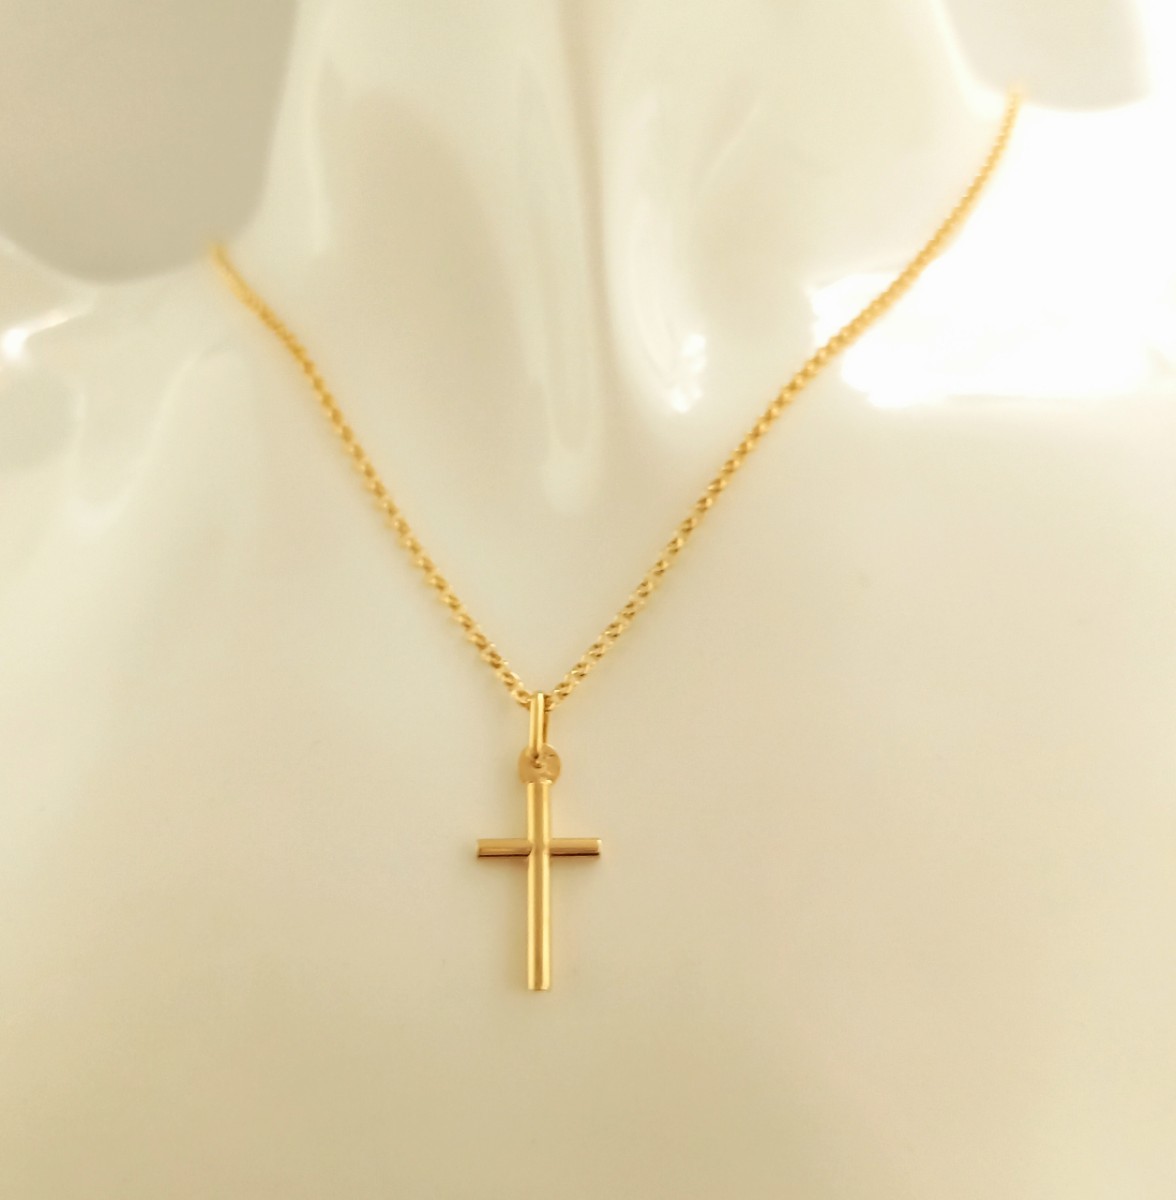  new goods * Italy made K18(18 gold ) Cross pendant top 